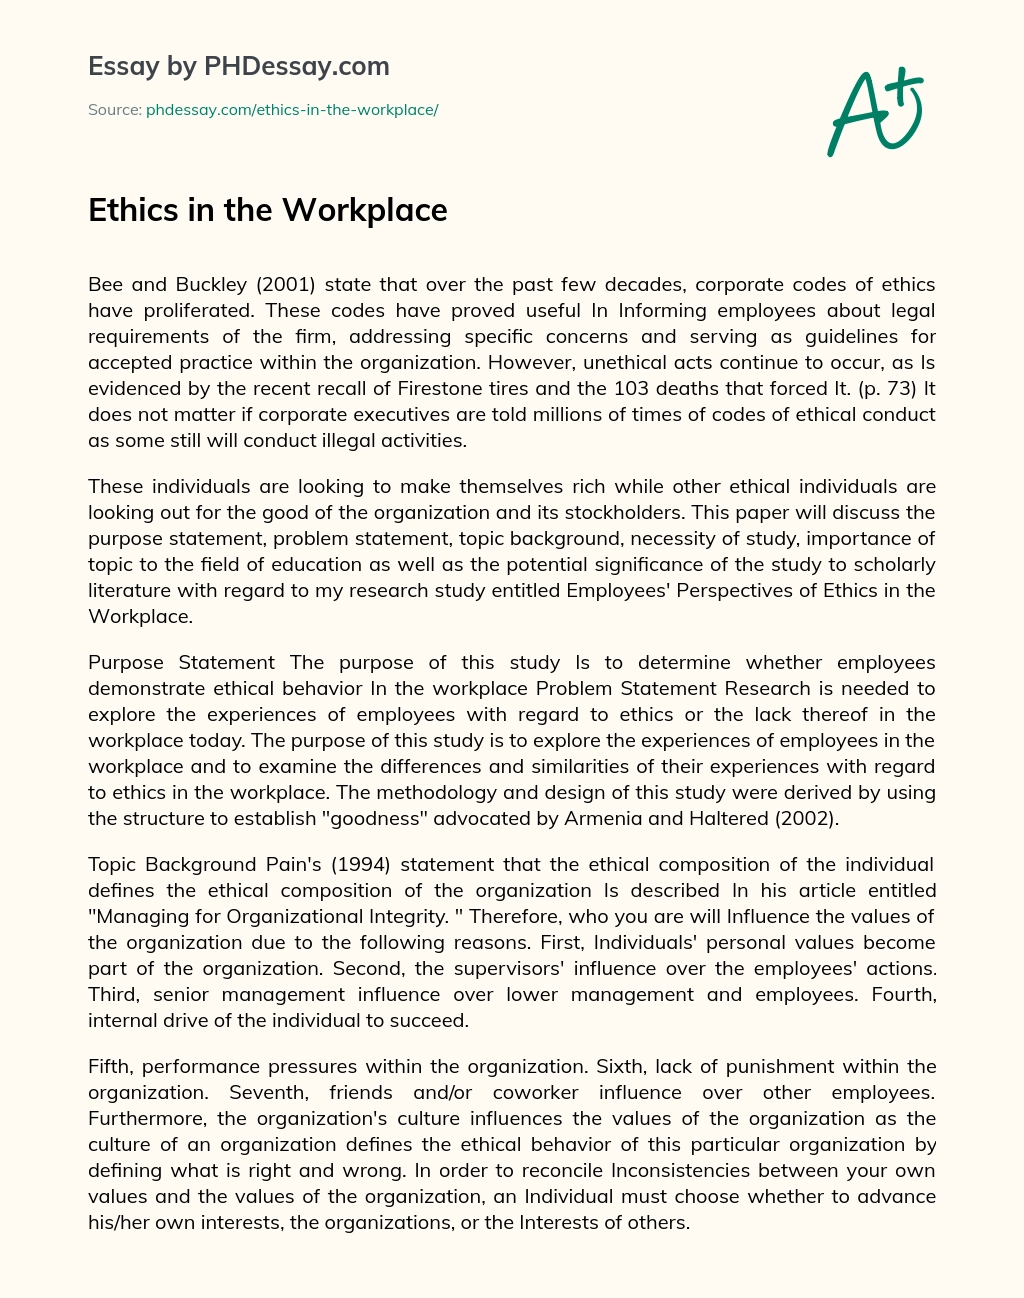 Ethics in the Workplace essay